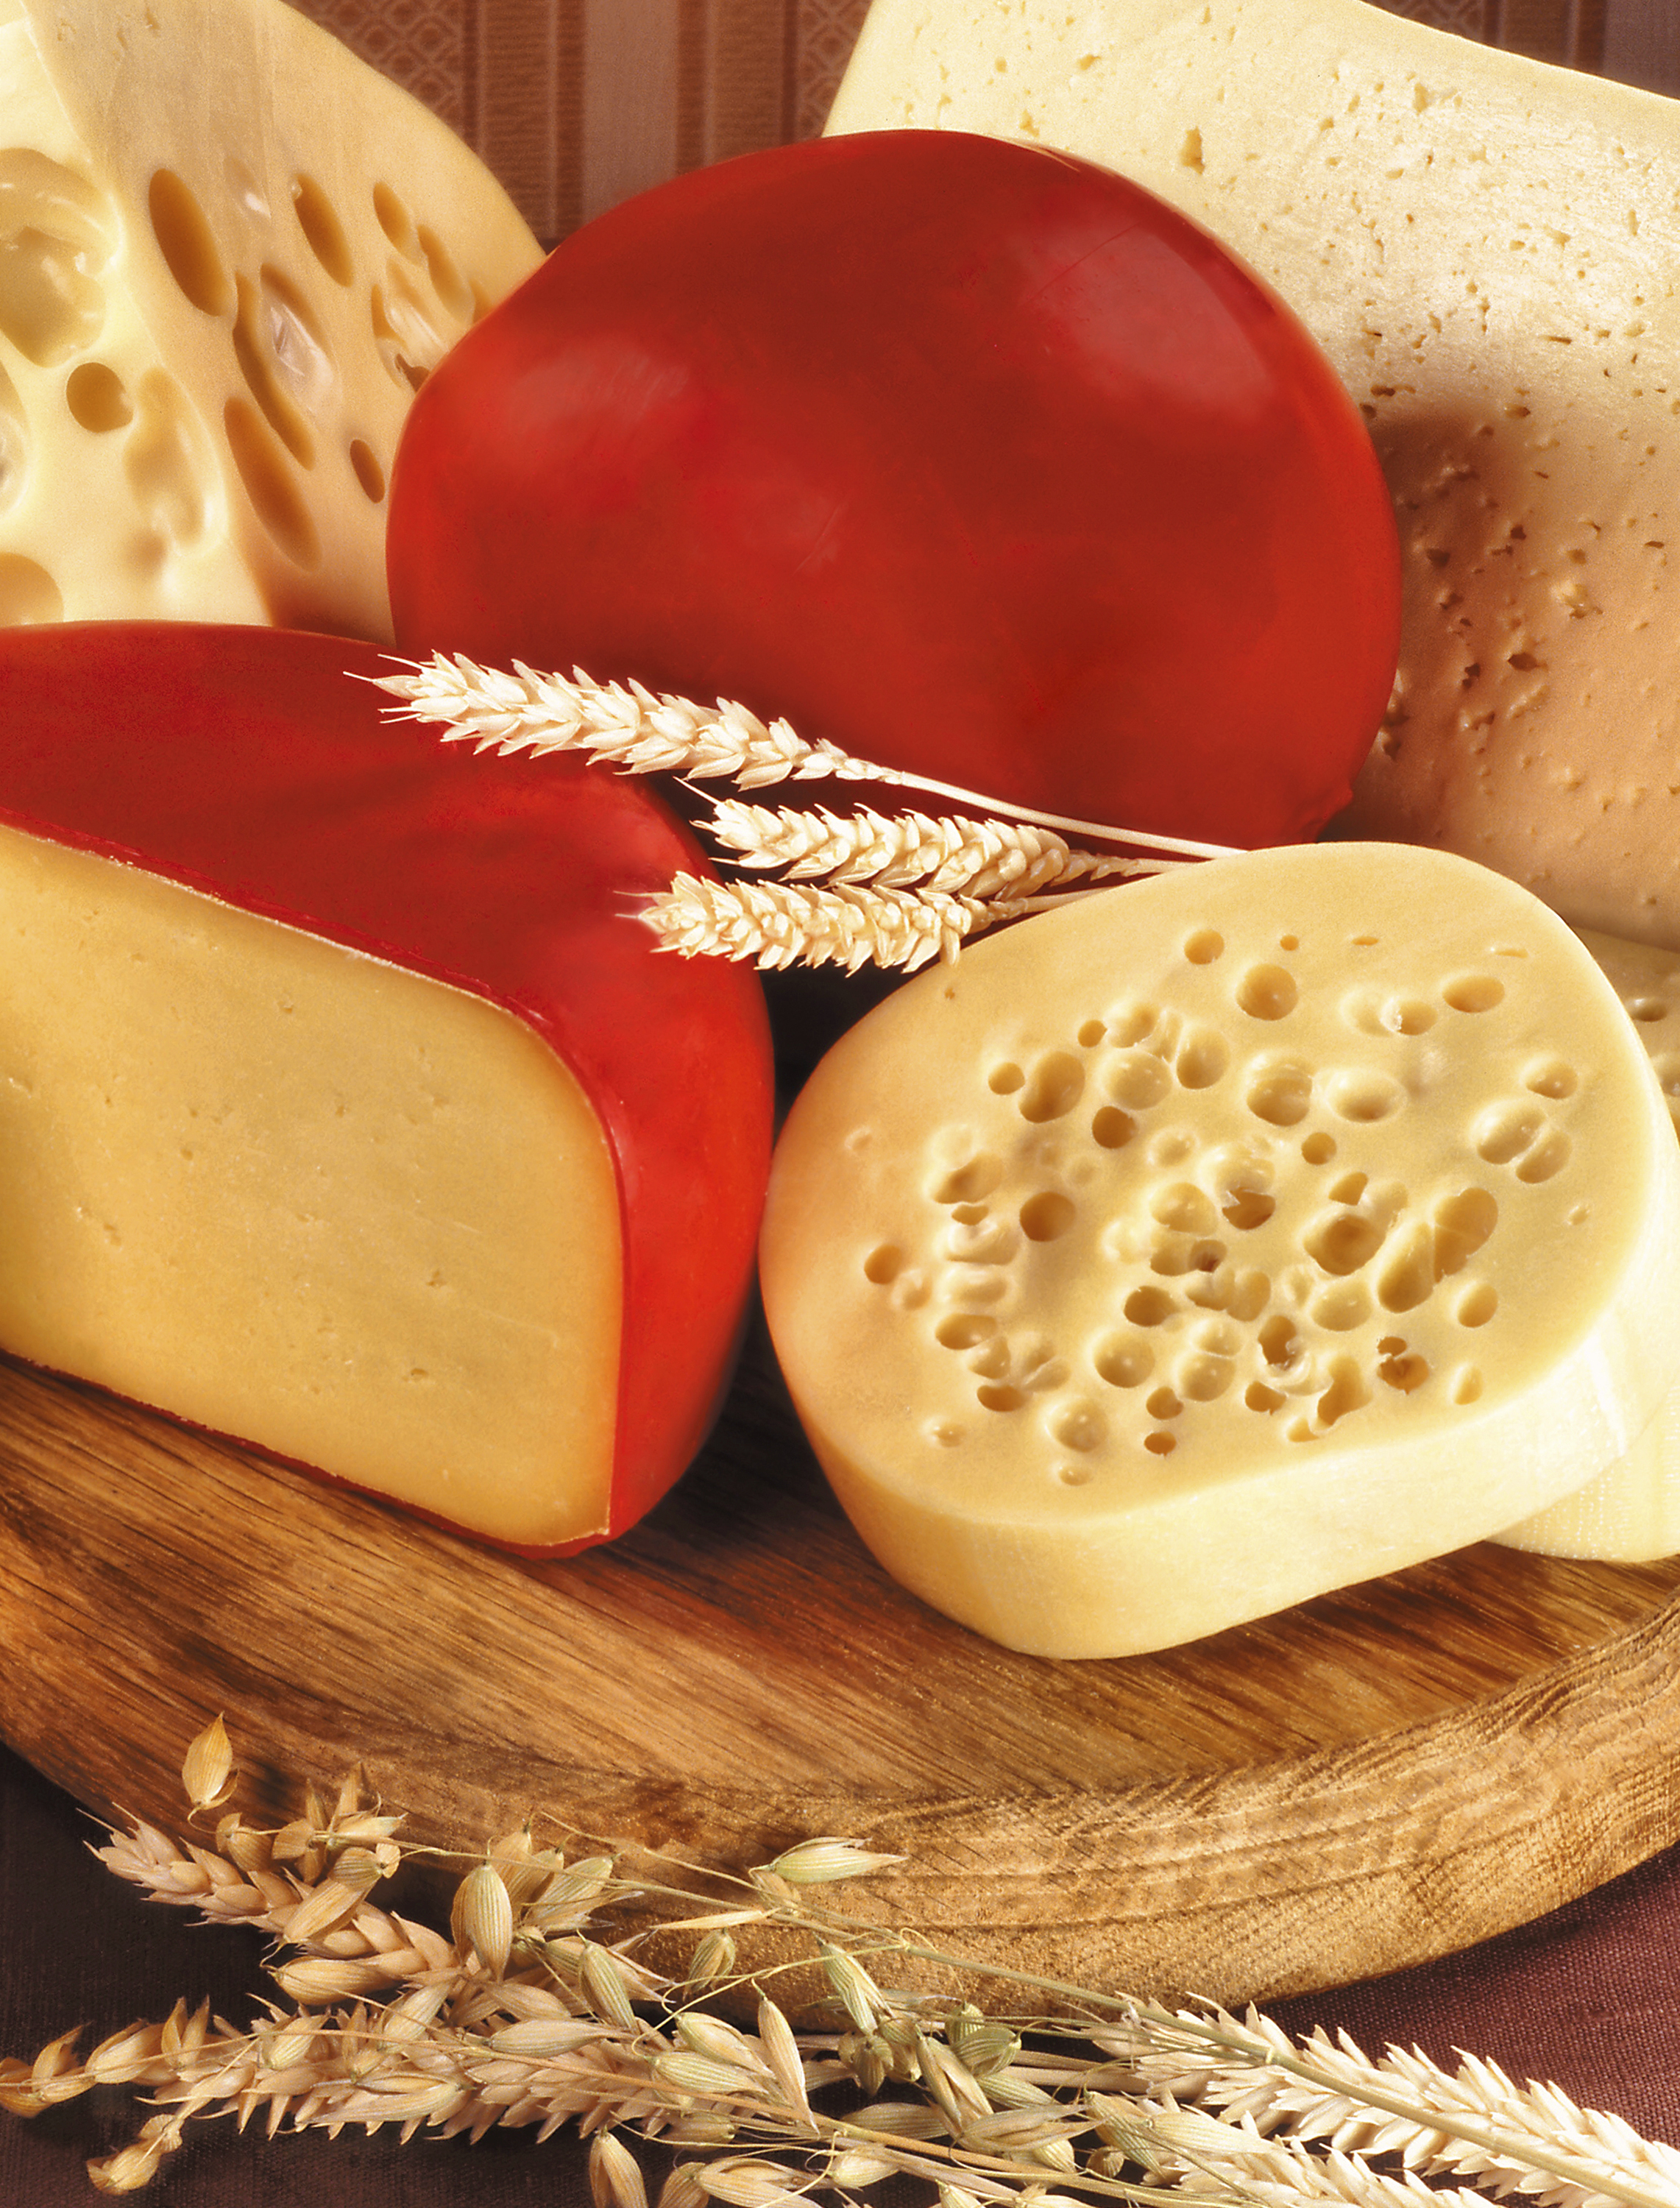 Why Gouda Cheese Is Good For You - Jake's Gouda Cheese